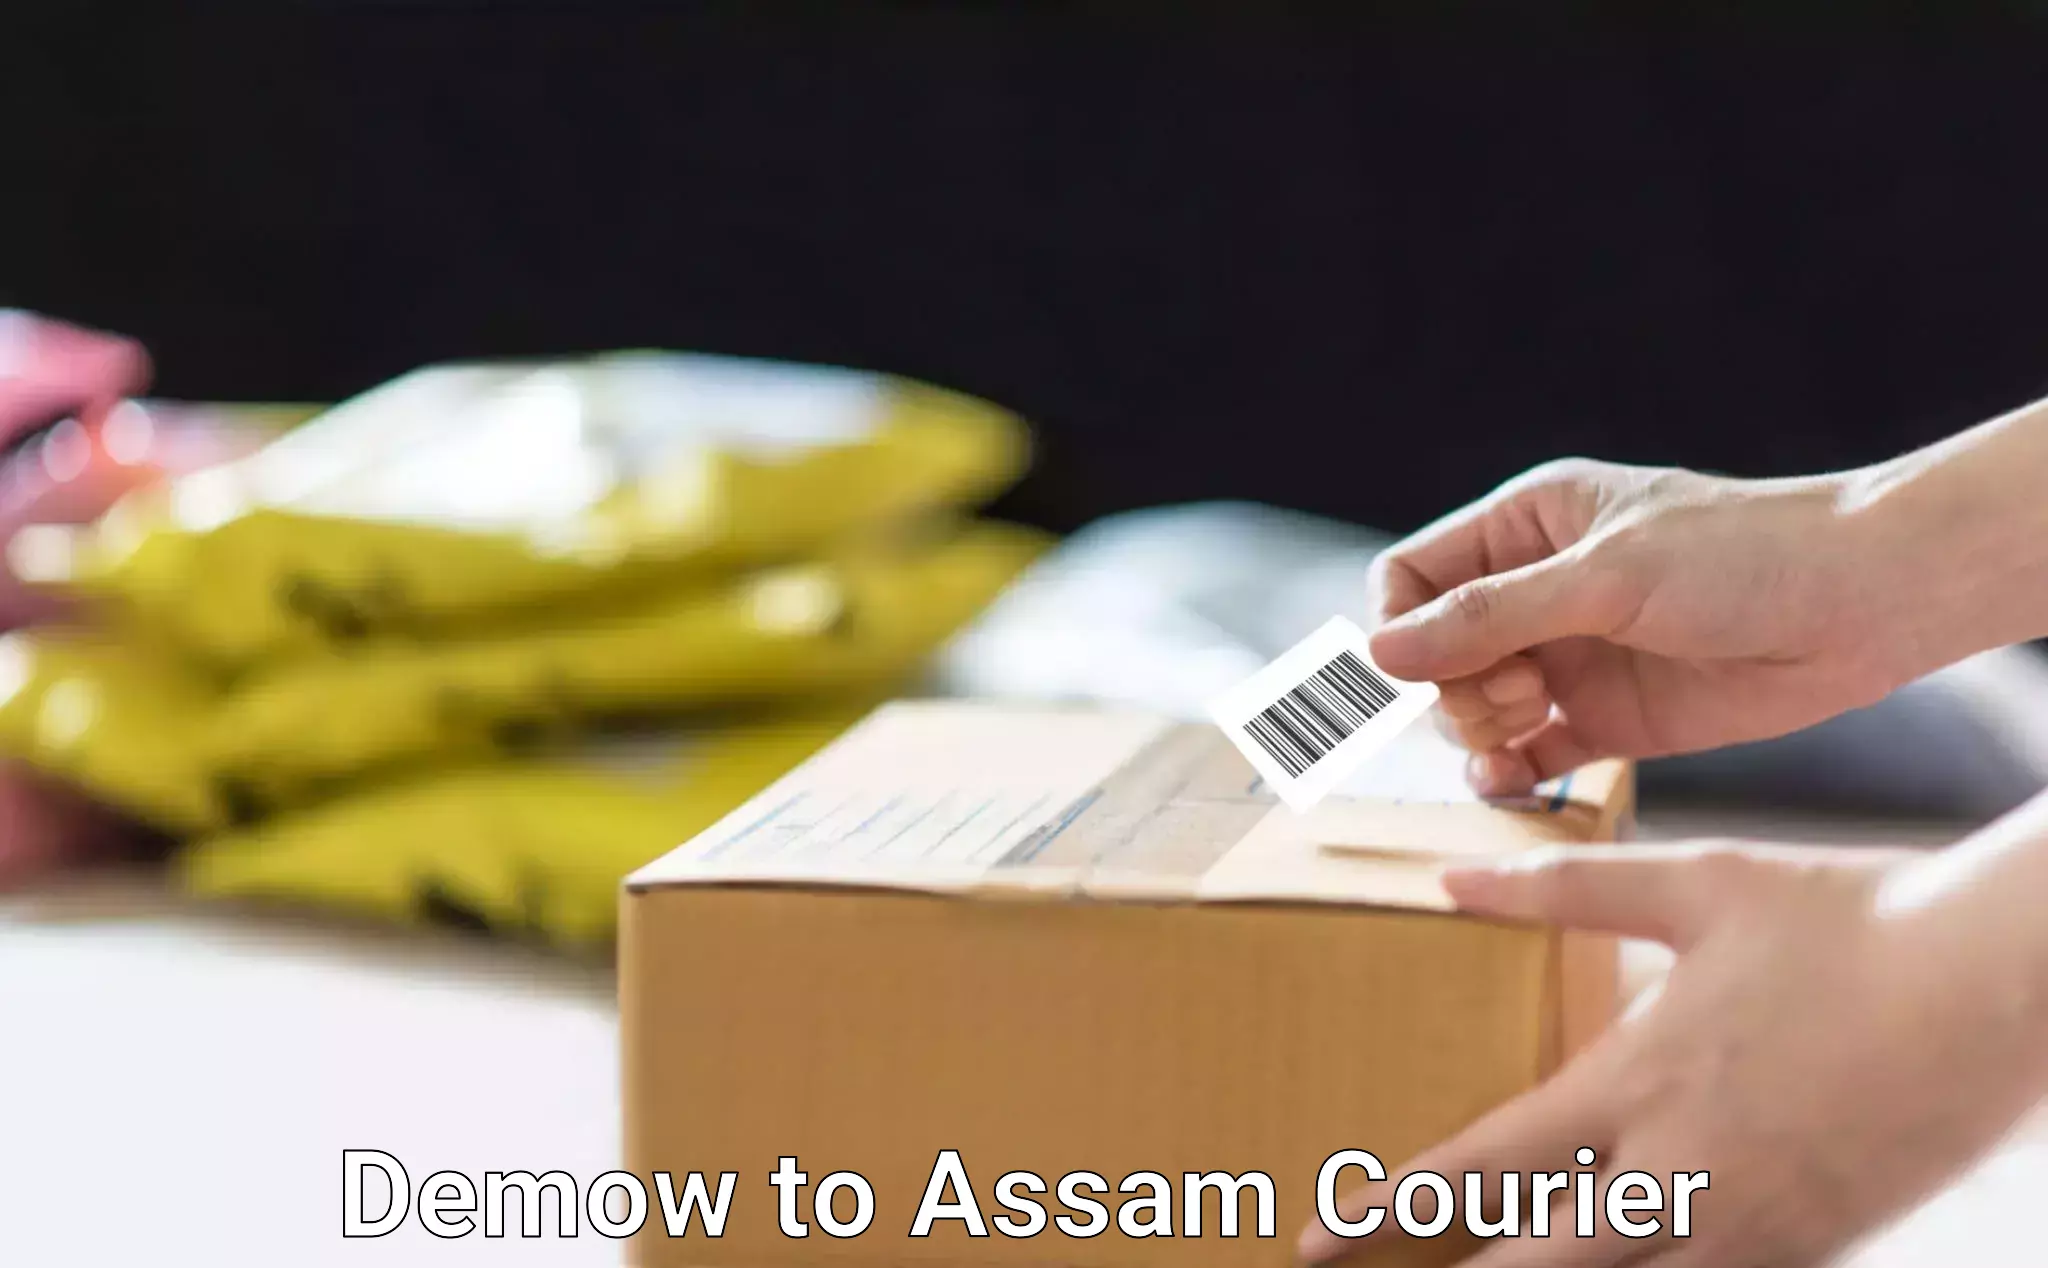 State-of-the-art courier technology Demow to Assam